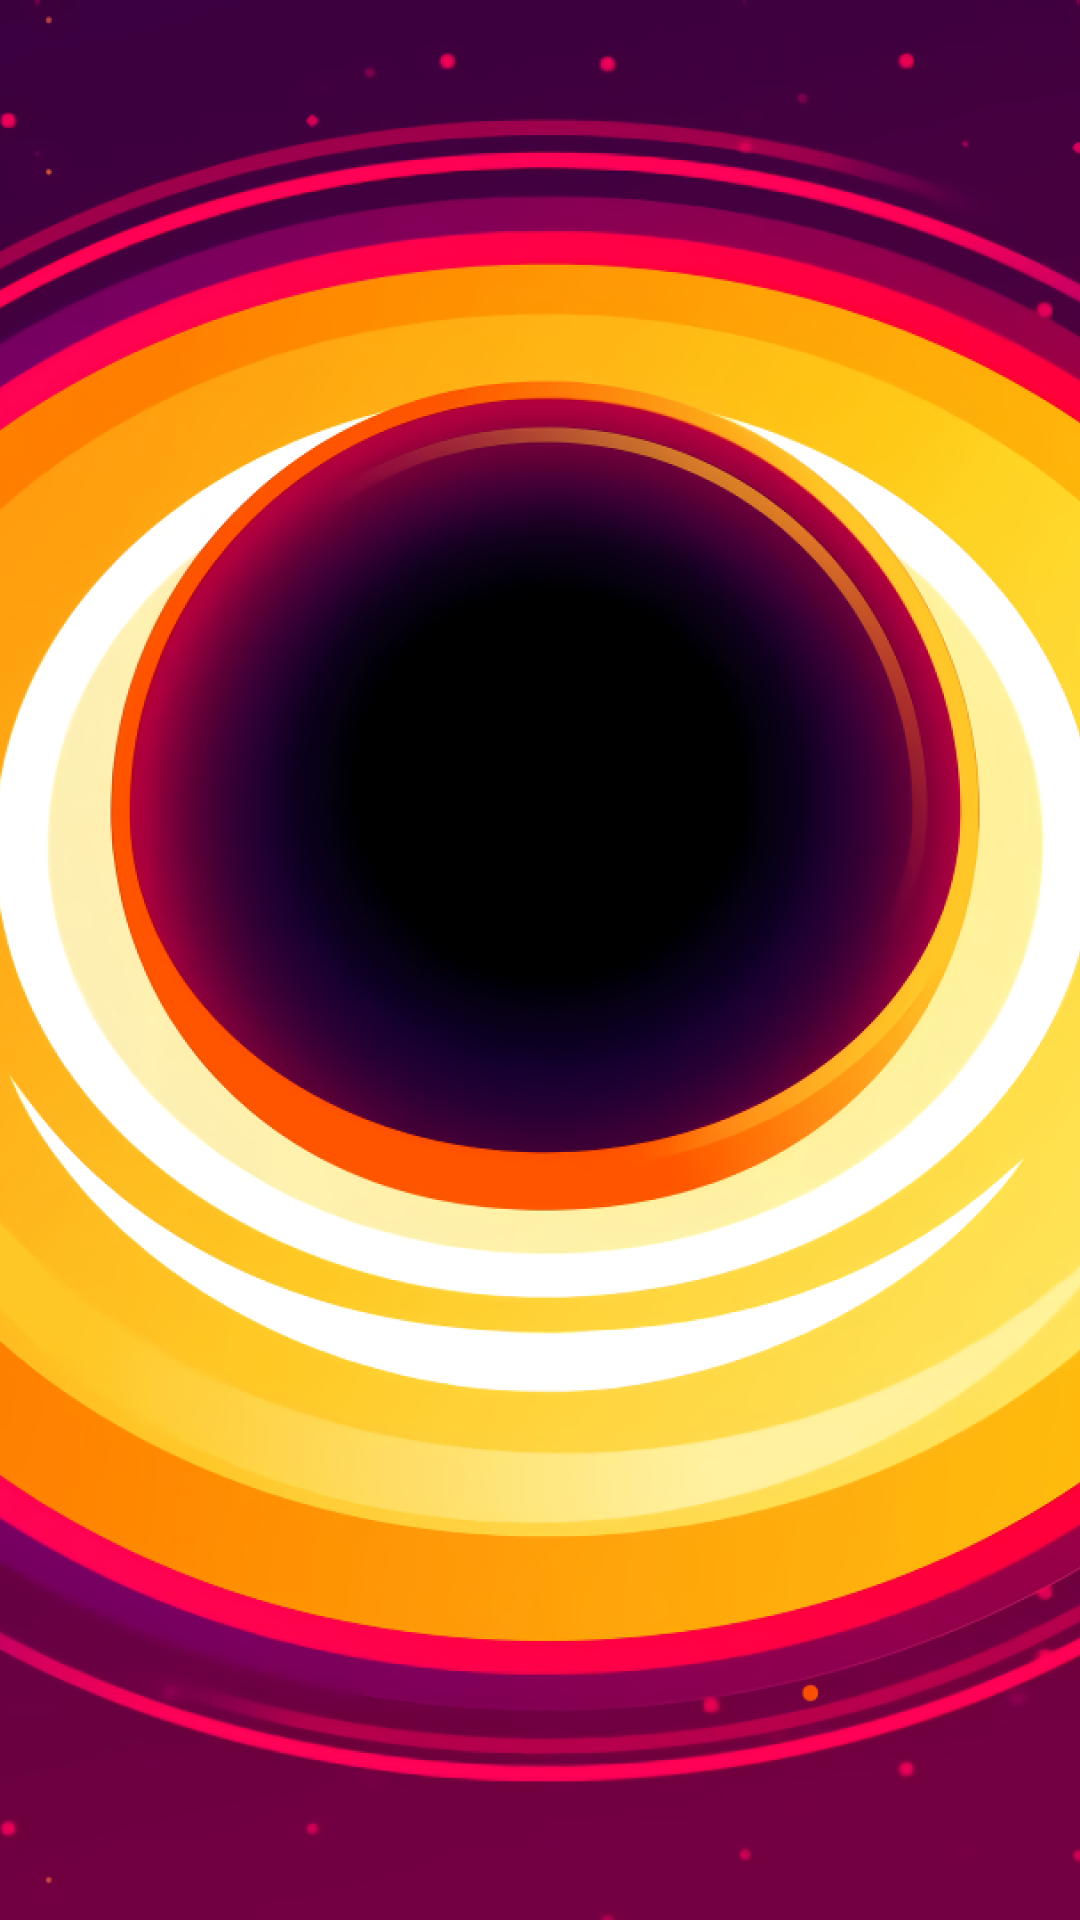 1080x1920 Resolution Black Hole SciFi Art 2021 Iphone 7, 6s, 6 Plus and ...